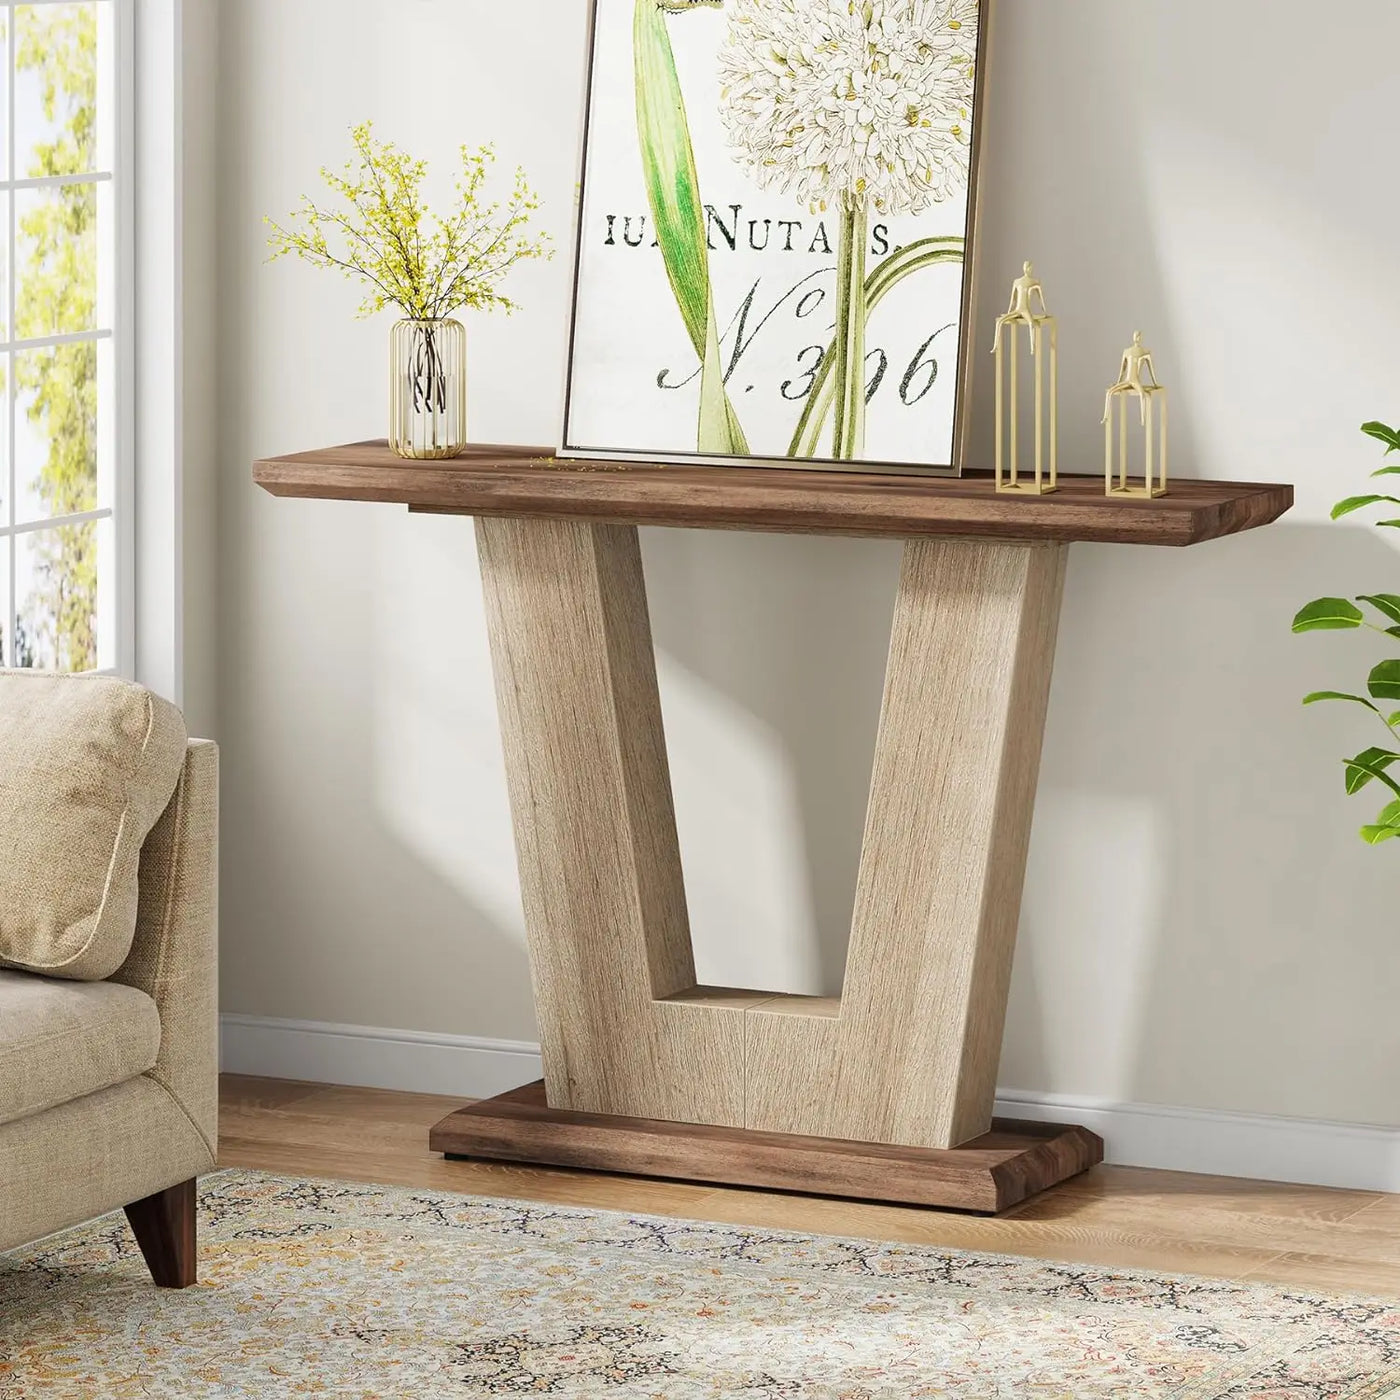 Toledo Wood Console Table | 42 Inches Farmhouse Entryway Table w/Geometric Base